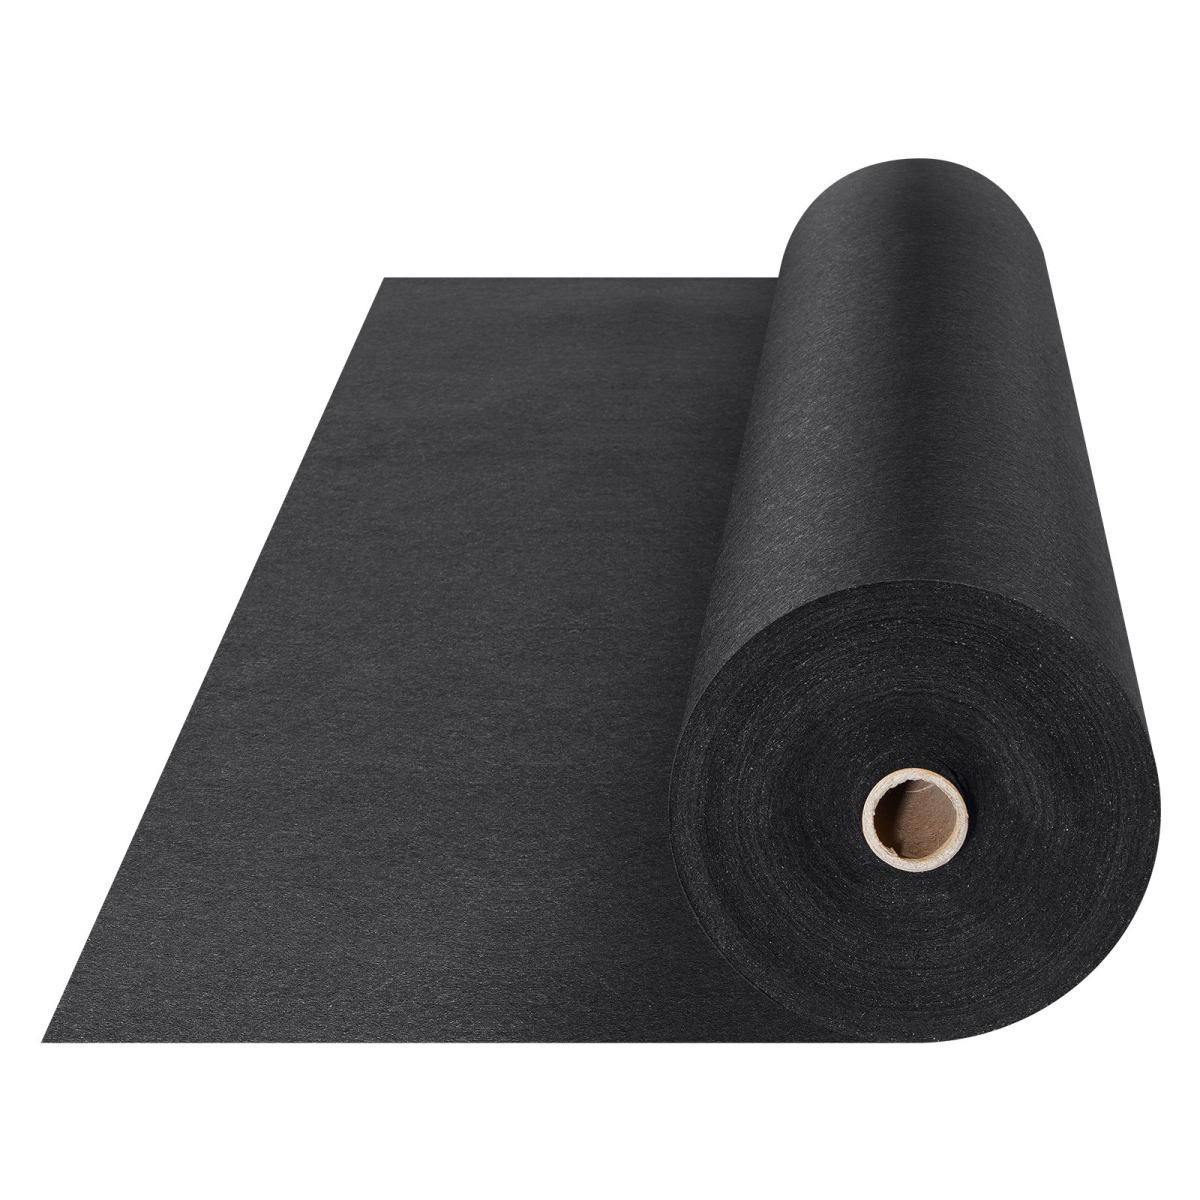 VEVOR WFB6100FT80ANXCYBV0 6 x 100 ft. 8 oz Non-Woven Geotextile Fabric Ground Cover Weed Control Fabric